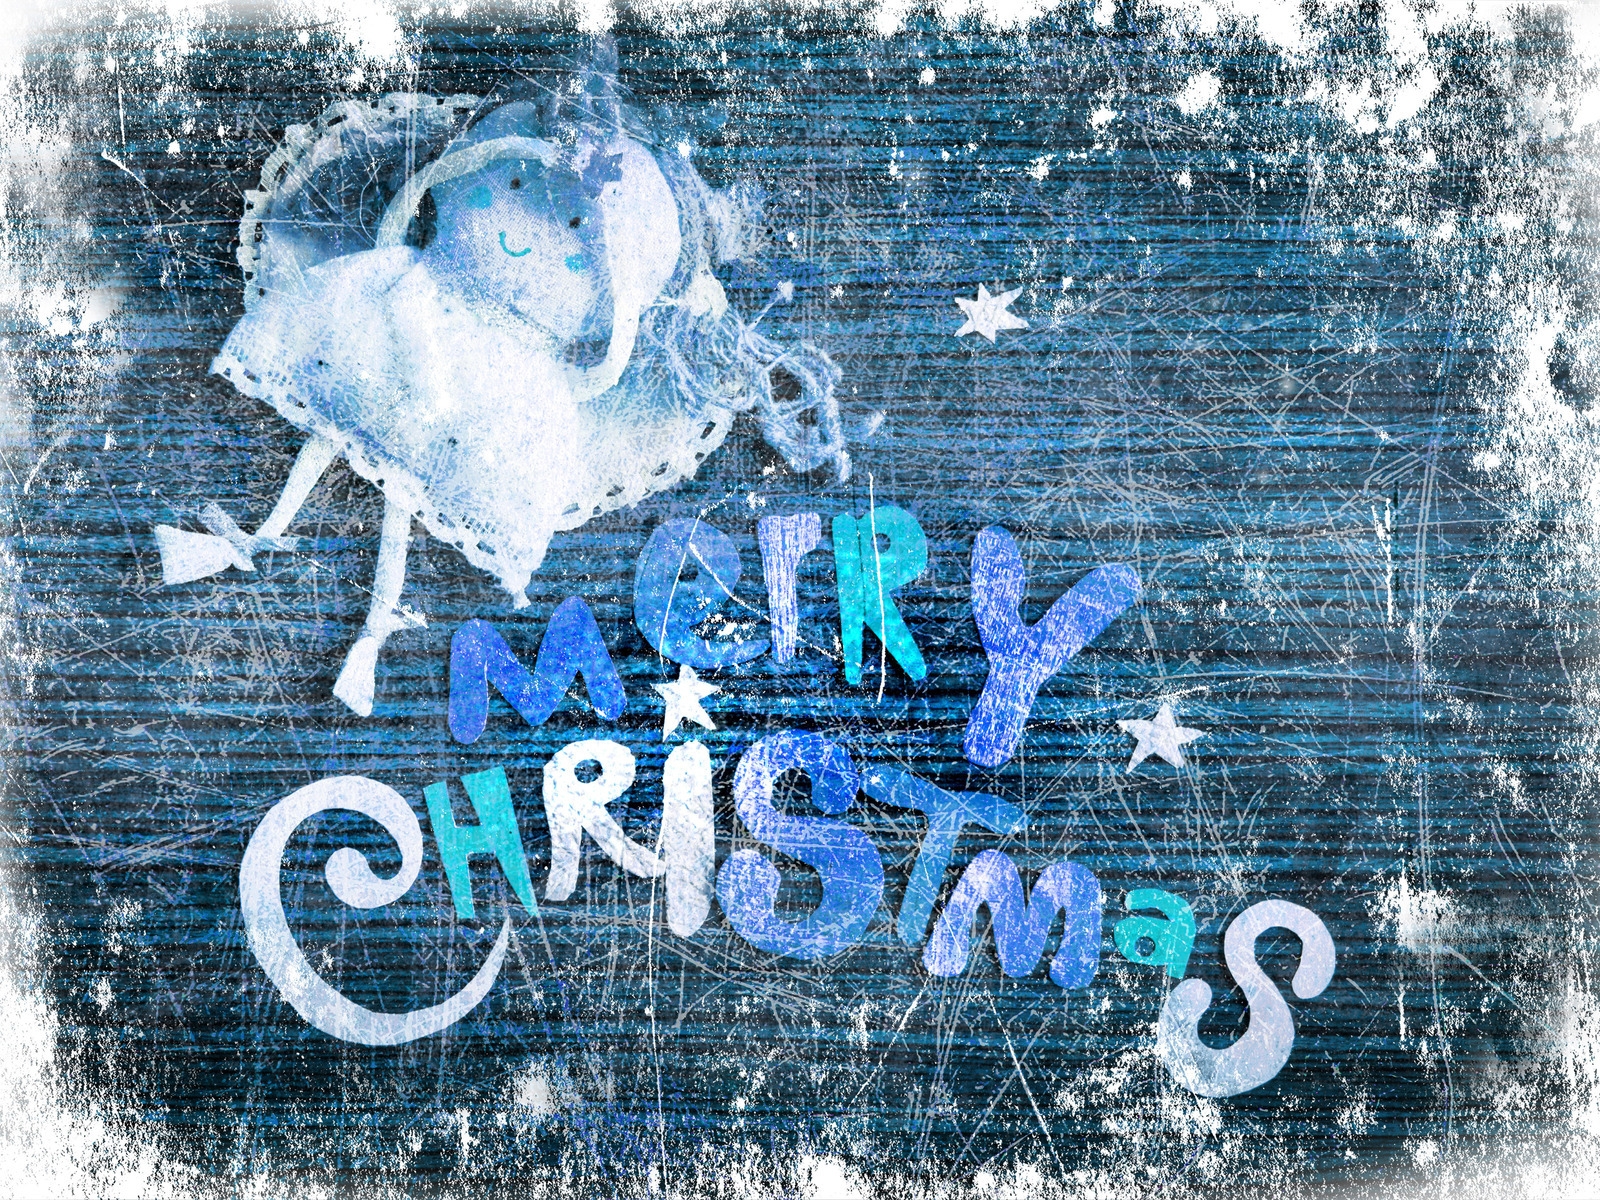 Merry Christmas Doll for 1600 x 1200 resolution